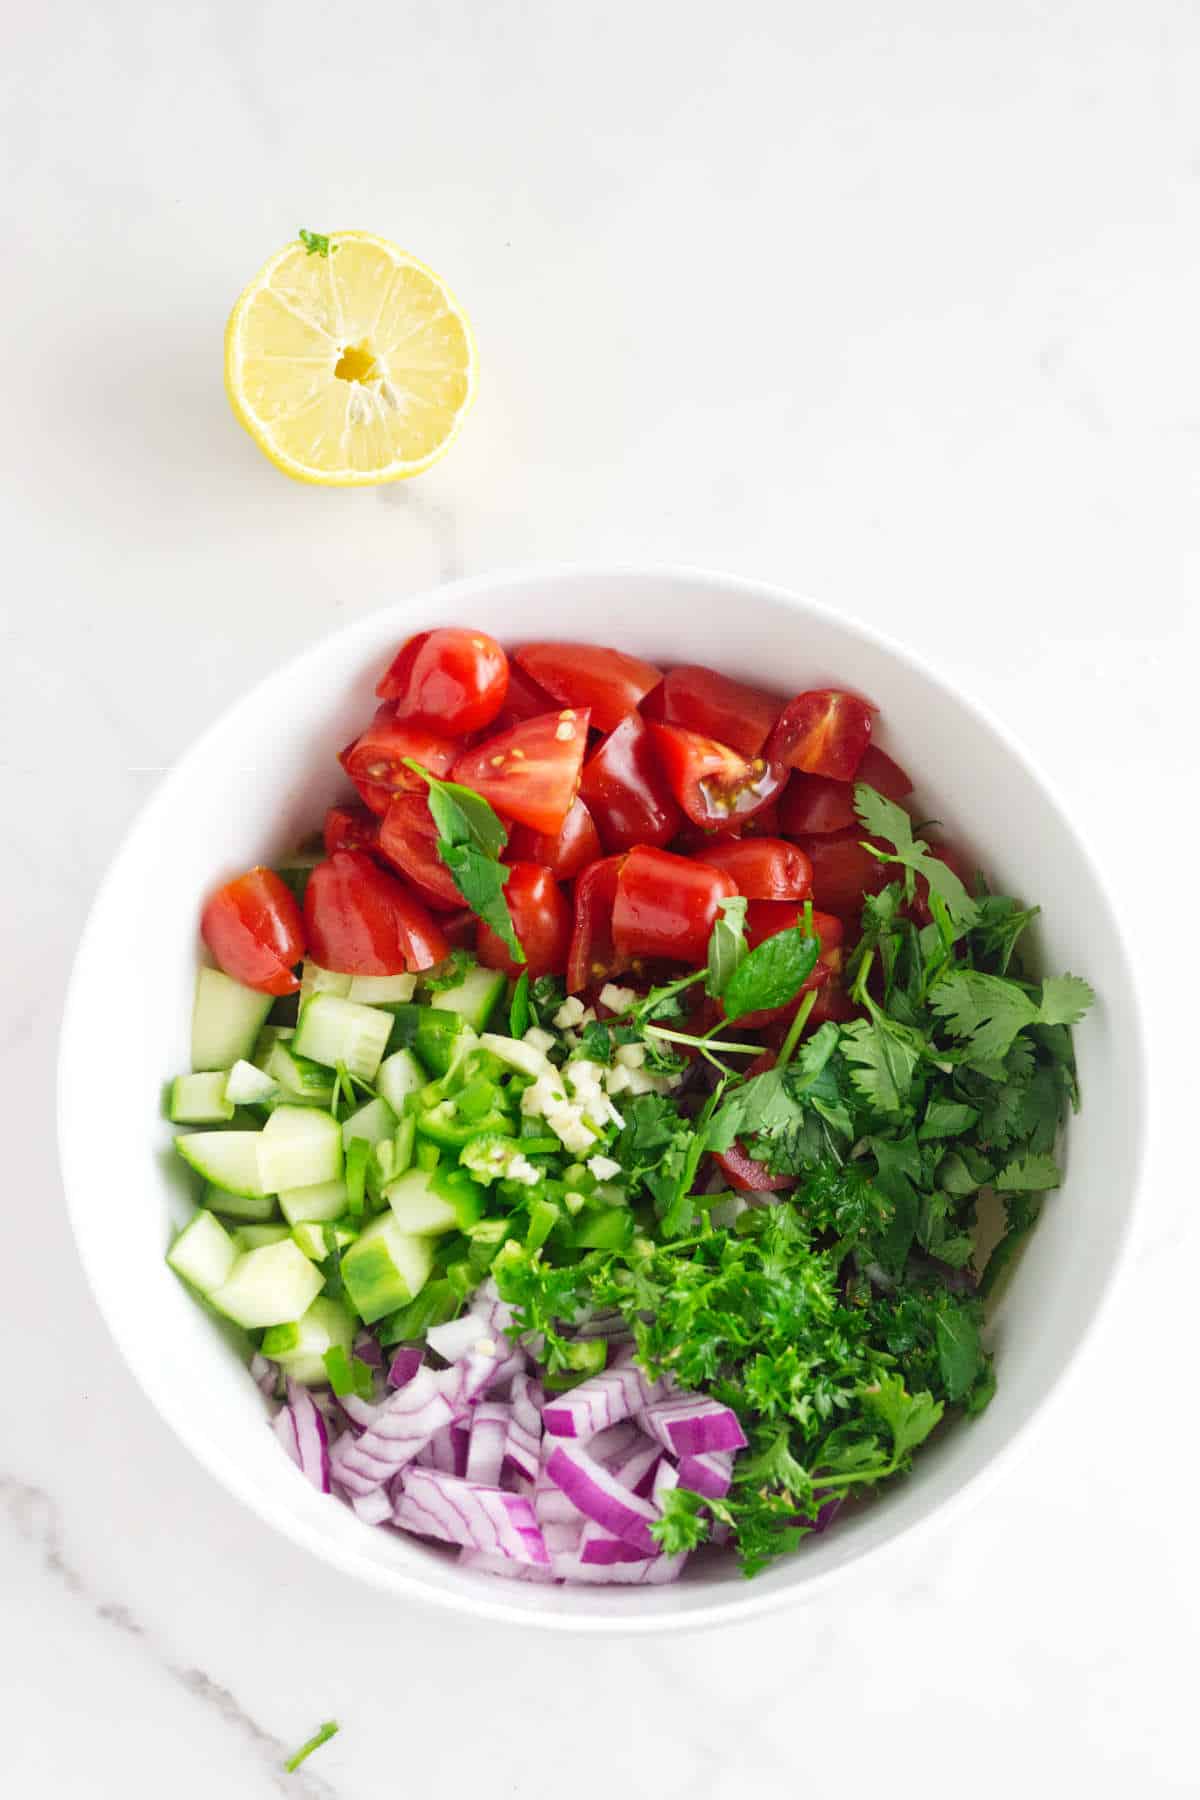 Chopped cucumbers, tomatoes, red onion, and herbs in a bowl.